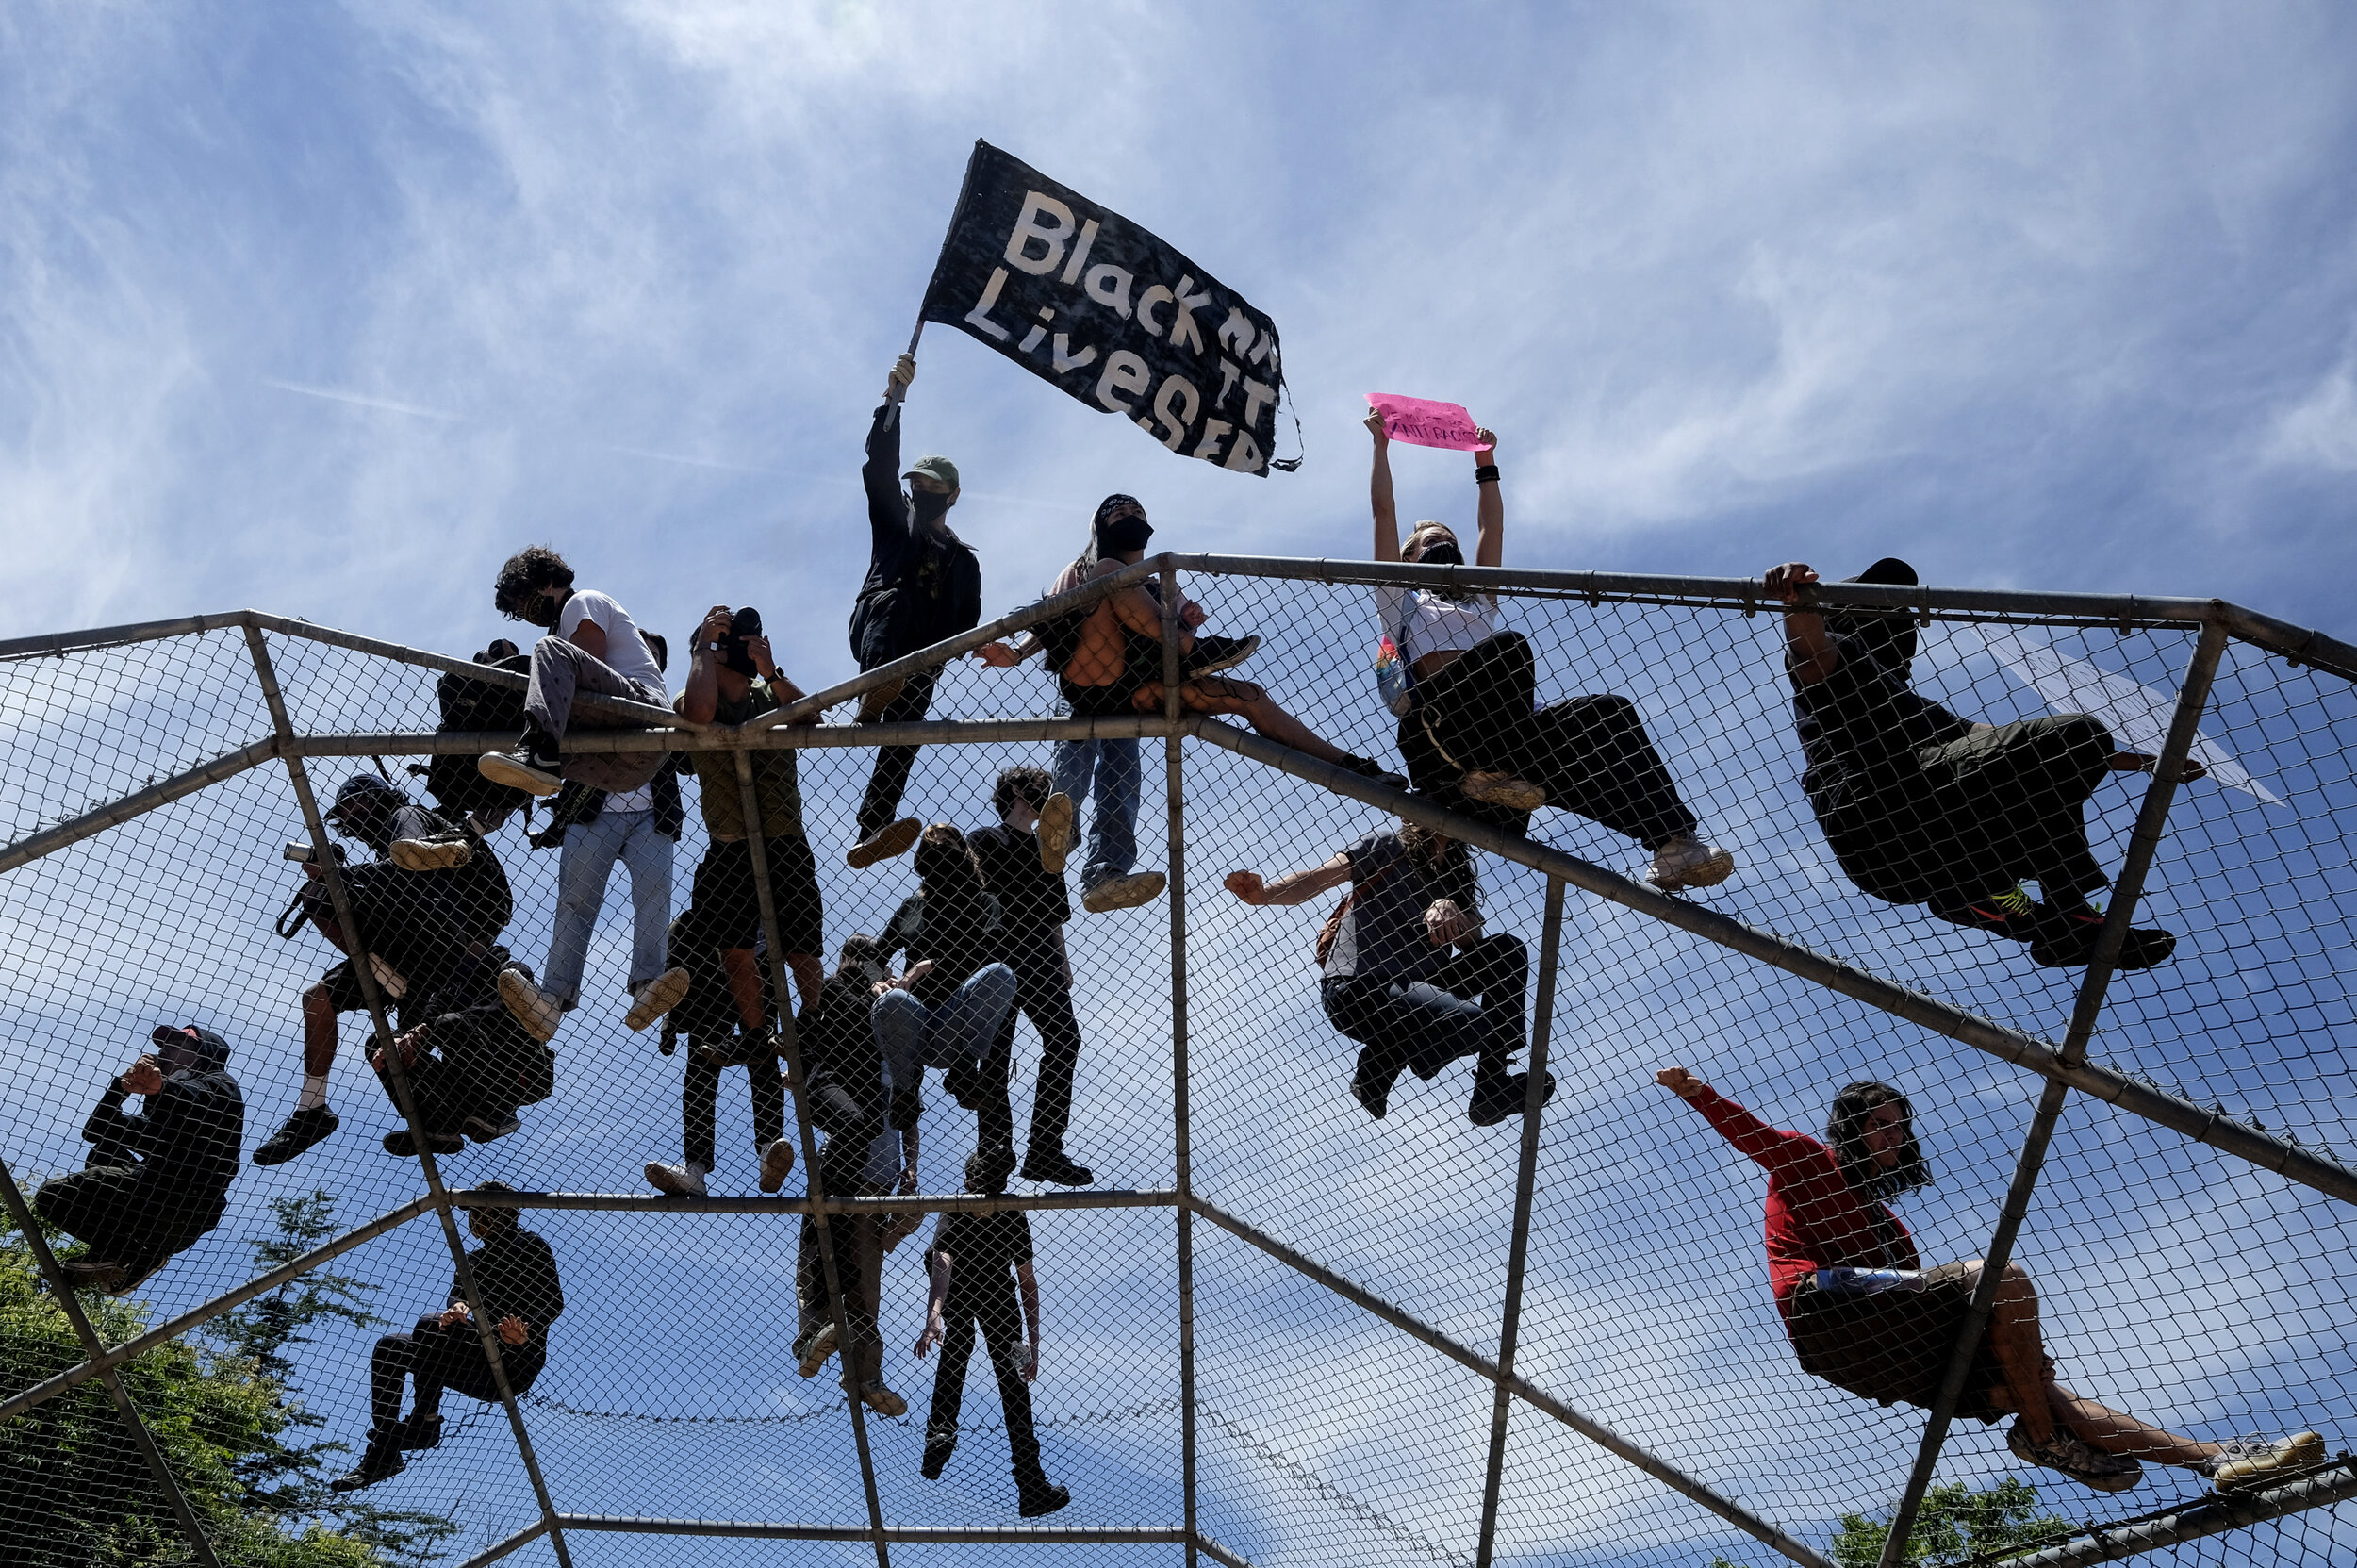  Protesters stand on top of a baseball backstop during a protest over the death of George Floyd, a handcuffed black man in police custody in Minneapolis, in Los Angeles, Saturday, May 30, 2020.The 2020 Black Lives Matter protests across the nation we